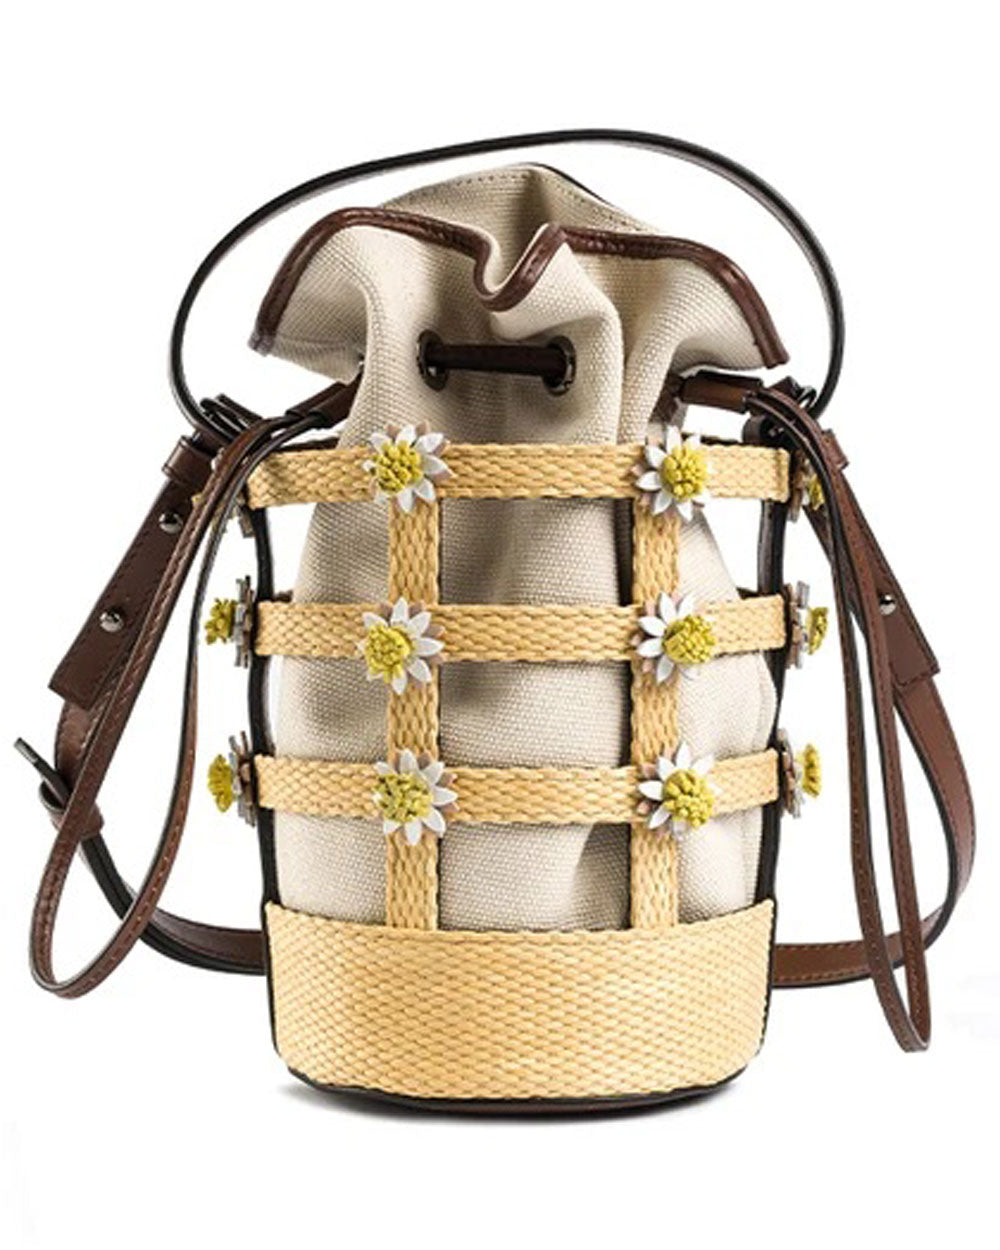 Miss Daisy Bucket Bag with Canvas Pouch in Raffia